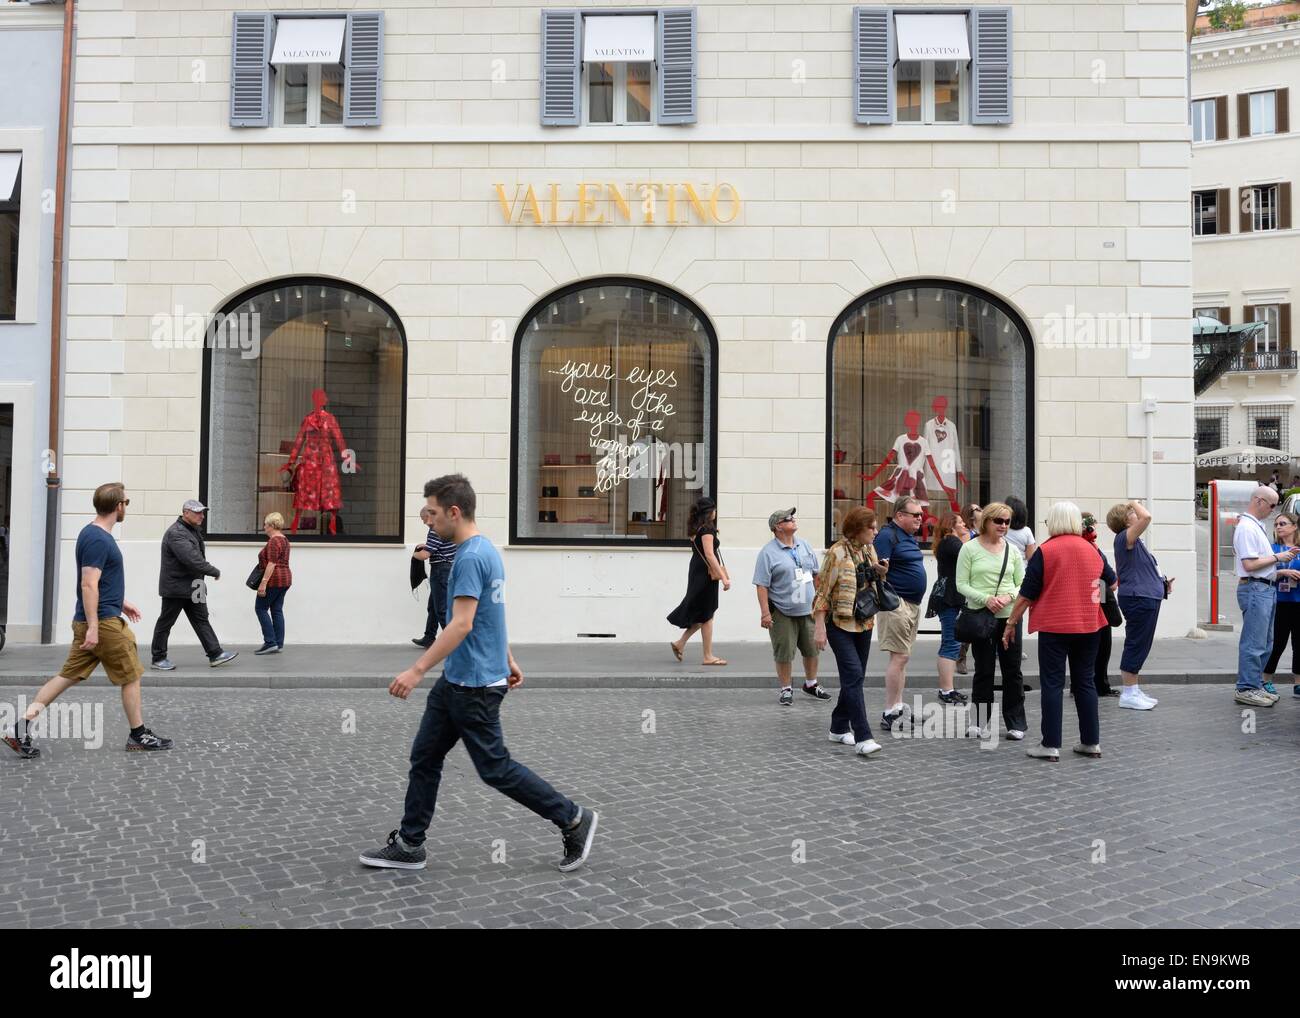 Valentino clothing store on the PIAZZA DI SPAGNA, Rome, Italy Stock Photo -  Alamy